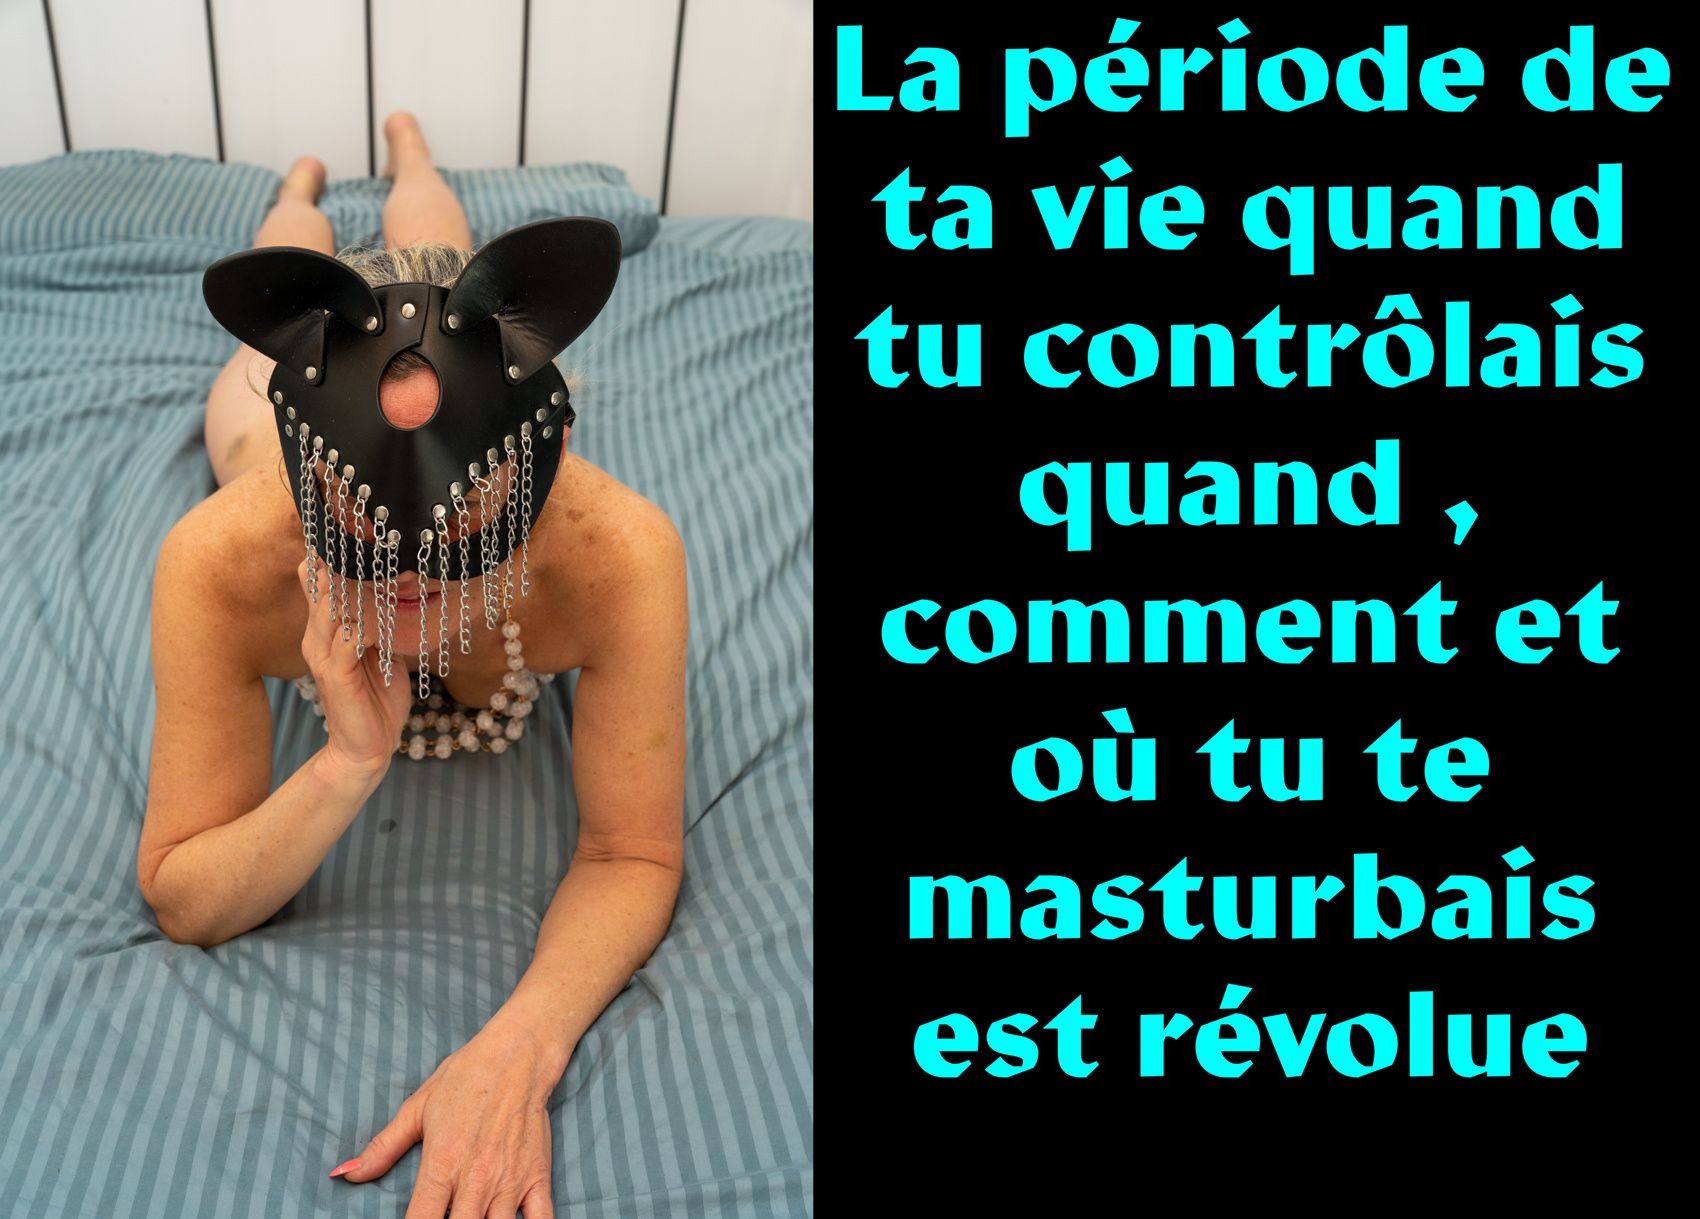 captions about chastity and femdom 450-550 #33